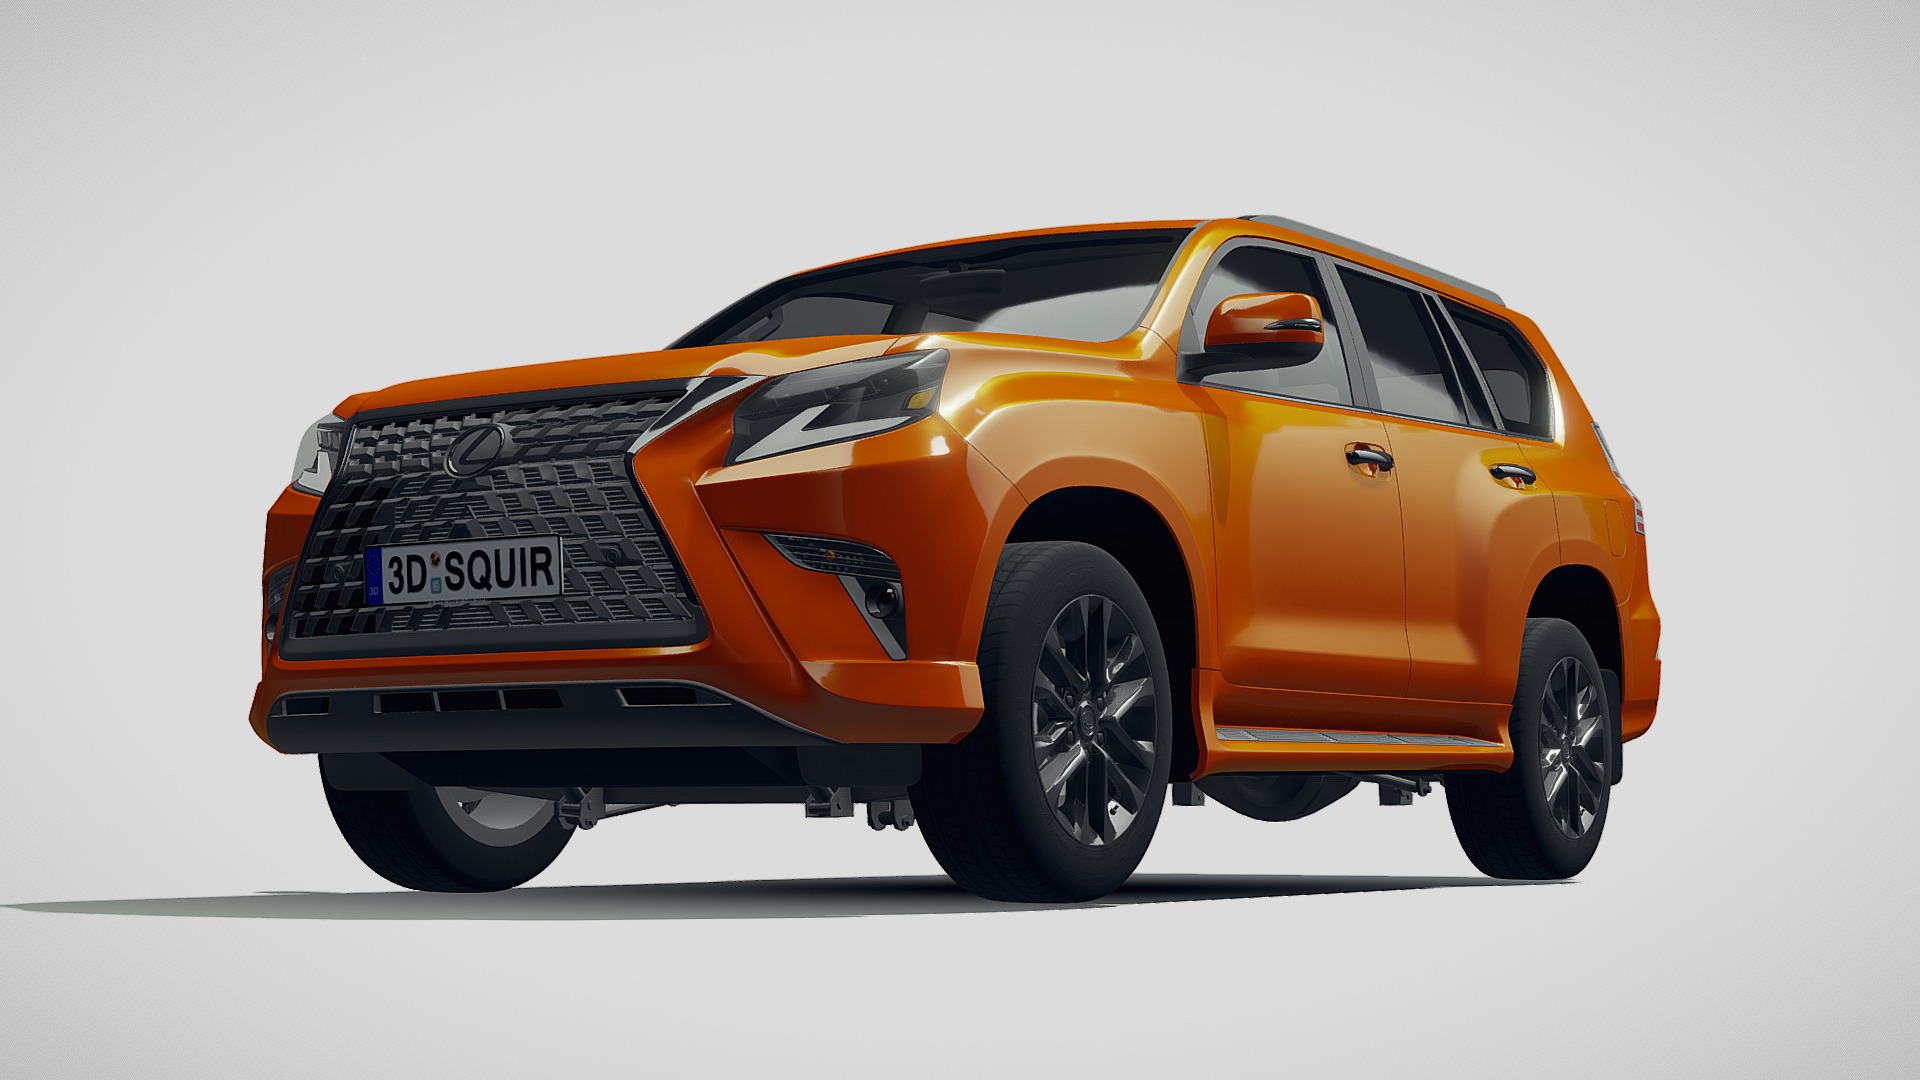 3D model Lexus GX 460 2020 - This is a 3D model of the Lexus GX 460 2020. The 3D model is about an orange car with a white background.